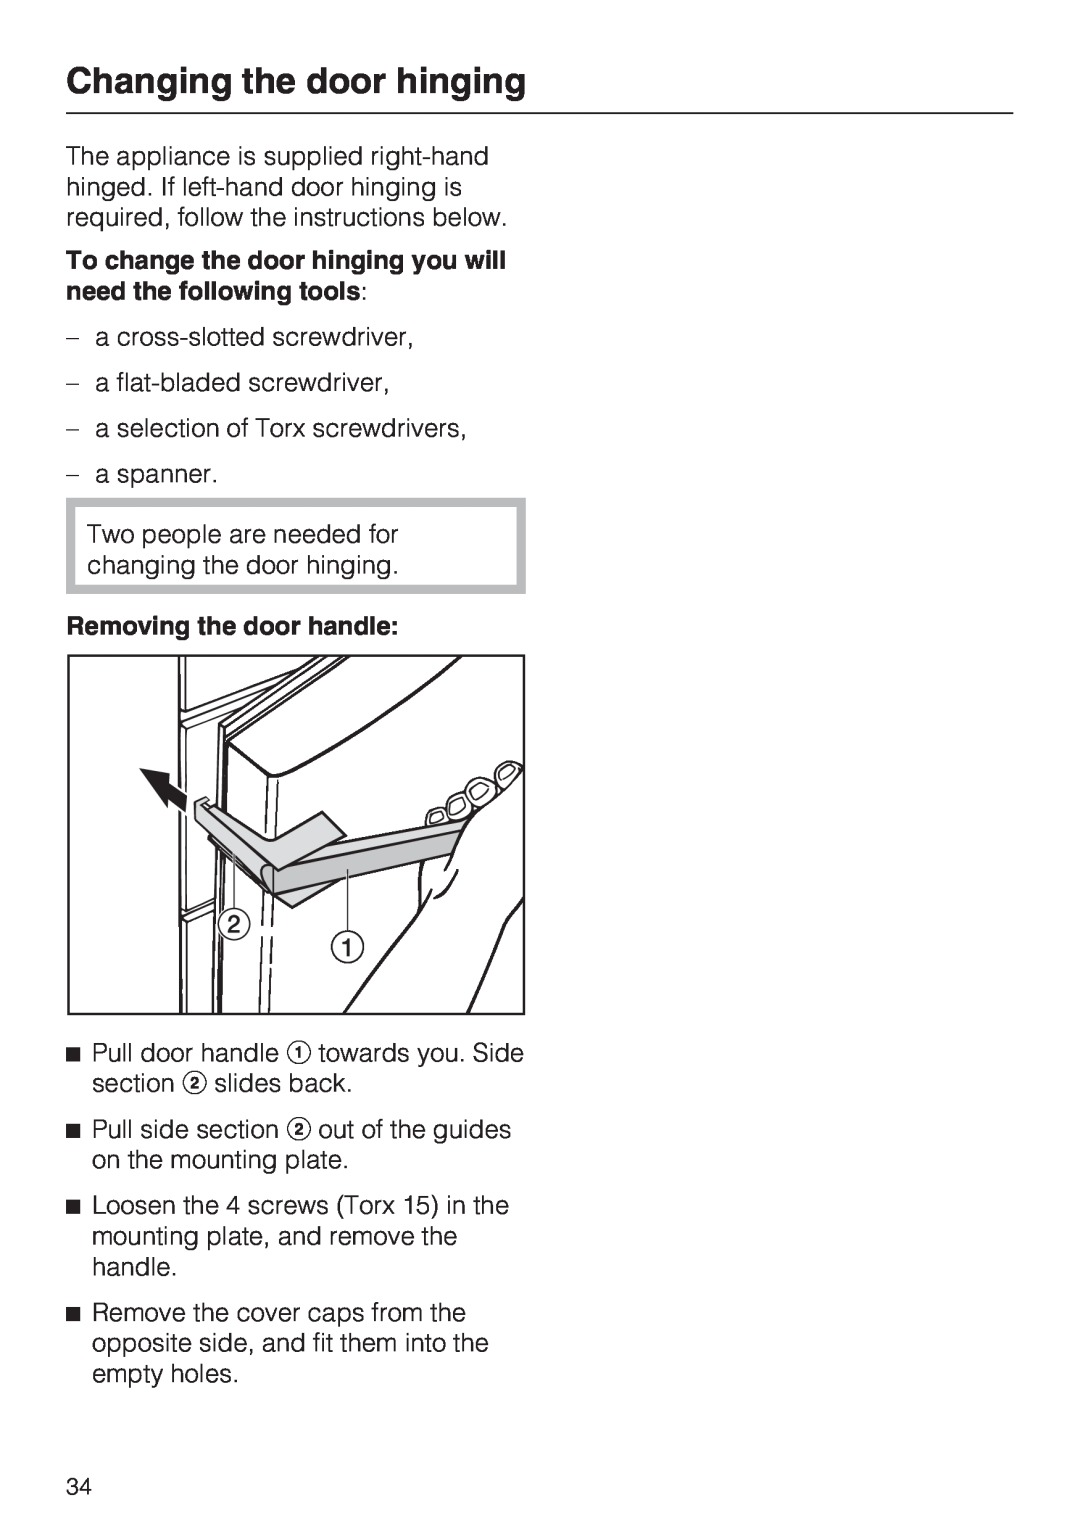 Miele FN 12620 S, FN 12420 S, FN 12220 S installation instructions Changing the door hinging, Removing the door handle 